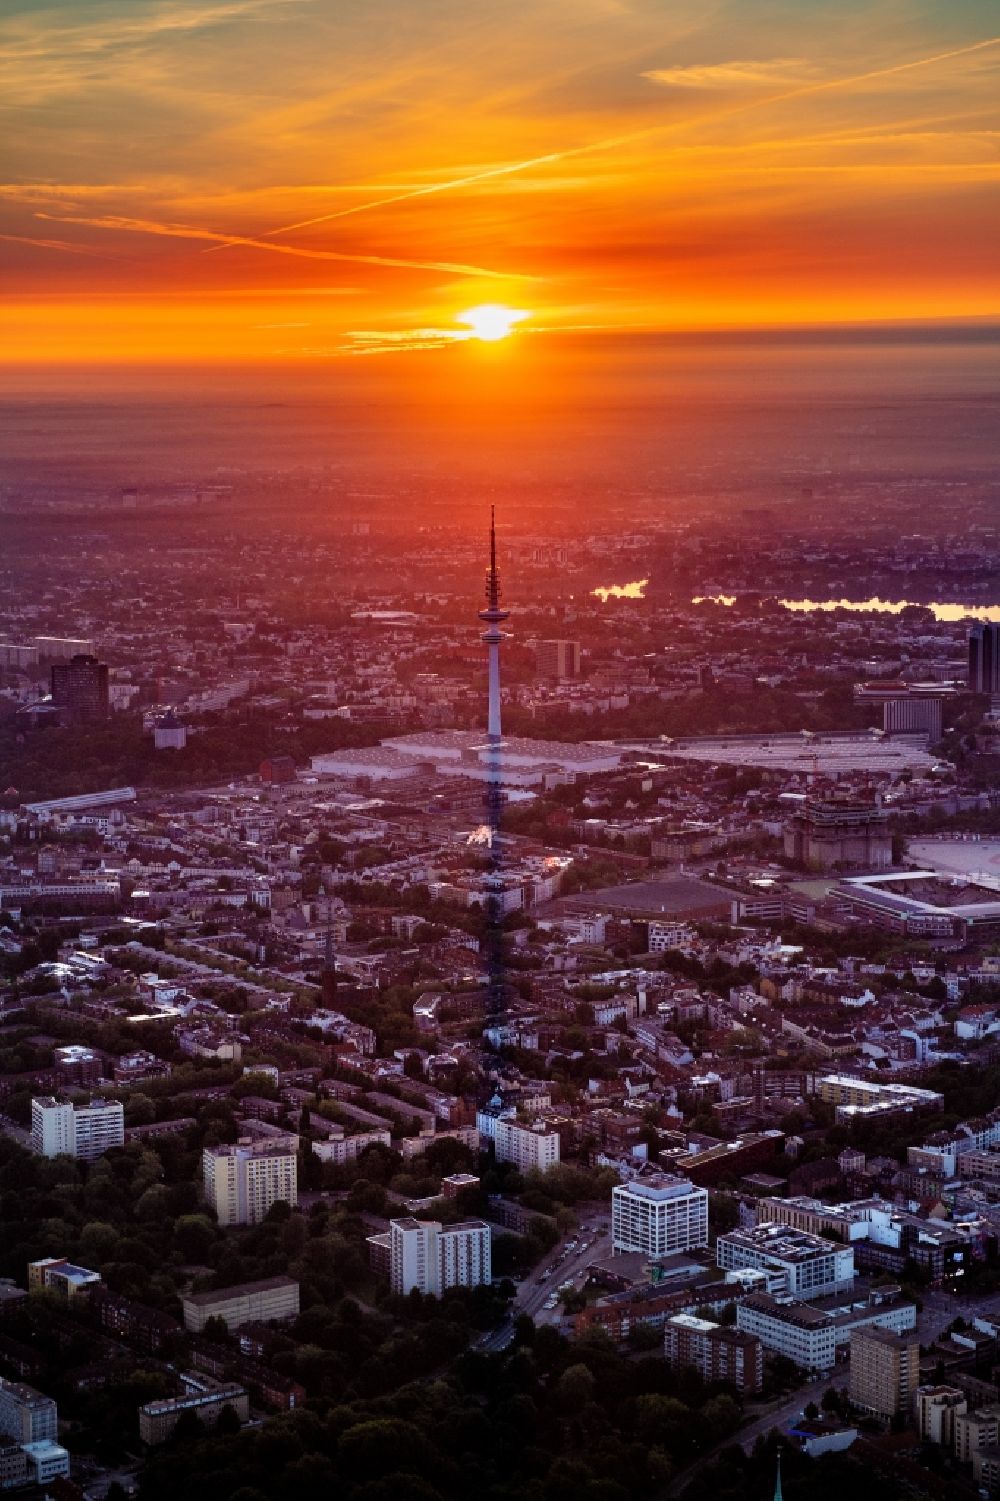 Hamburg from the bird's eye view: Sunrise TV tower Heinrich-Hertz-Turm at the exhibition center in Hamburg. The structure used as a telecommunications tower and for broadcasting stations belongs to the Deutsche Funkturm GmbH